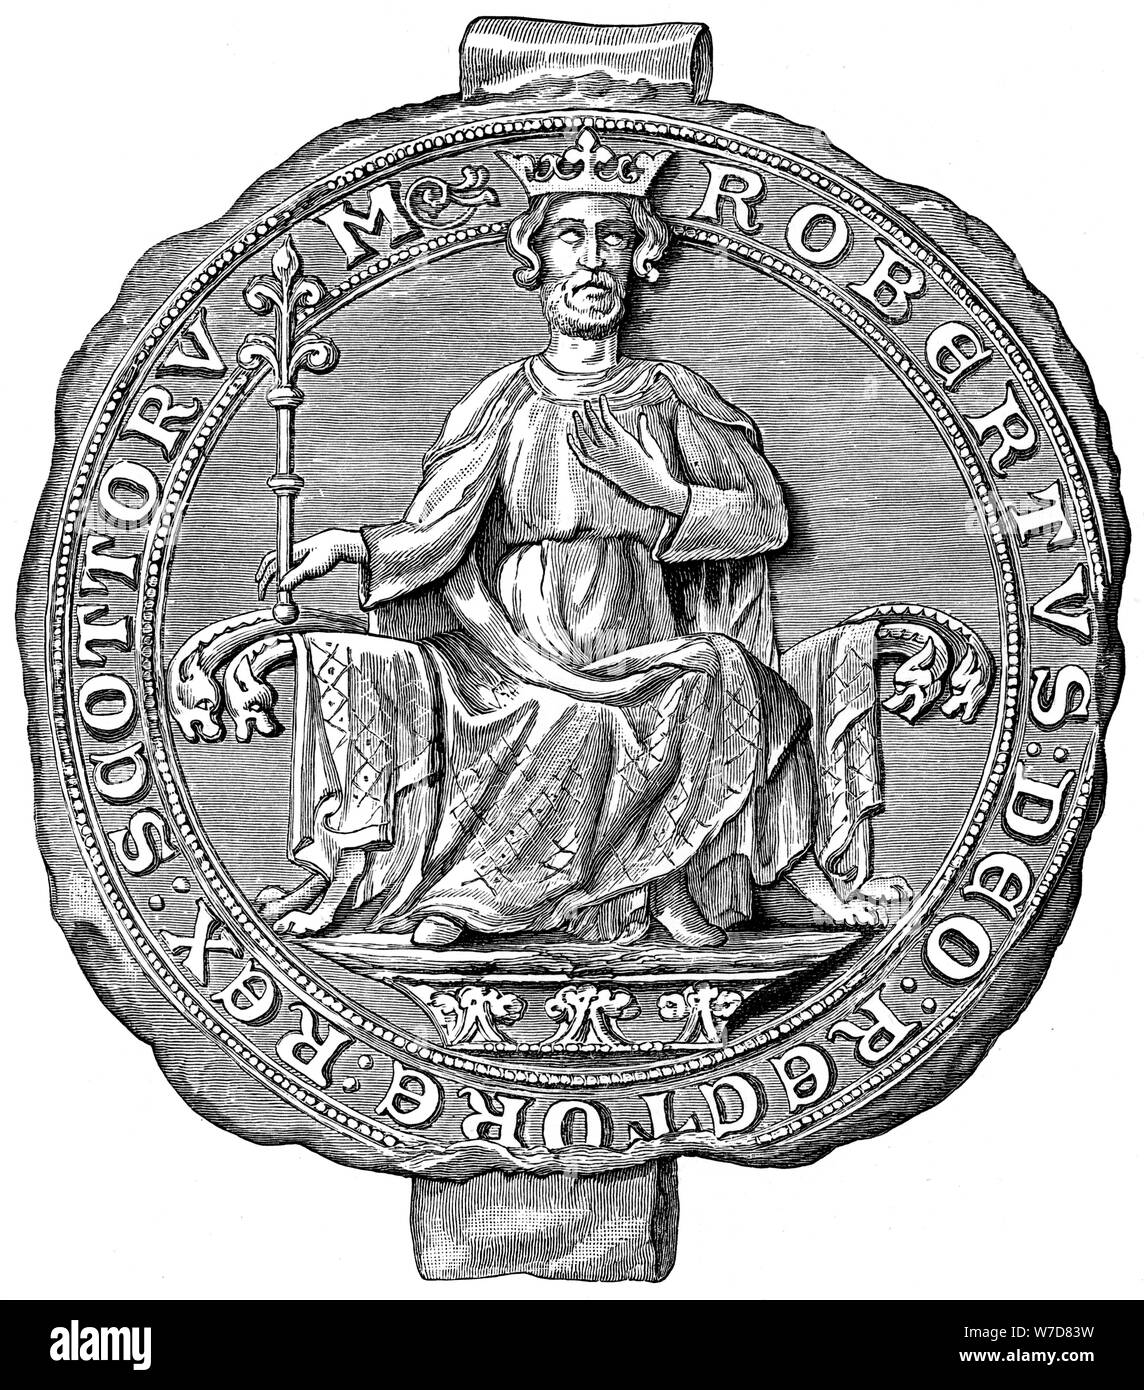 Seal of Robert the Bruce, King of Scotland, 14th century (1892). Artist: Unknown Stock Photo